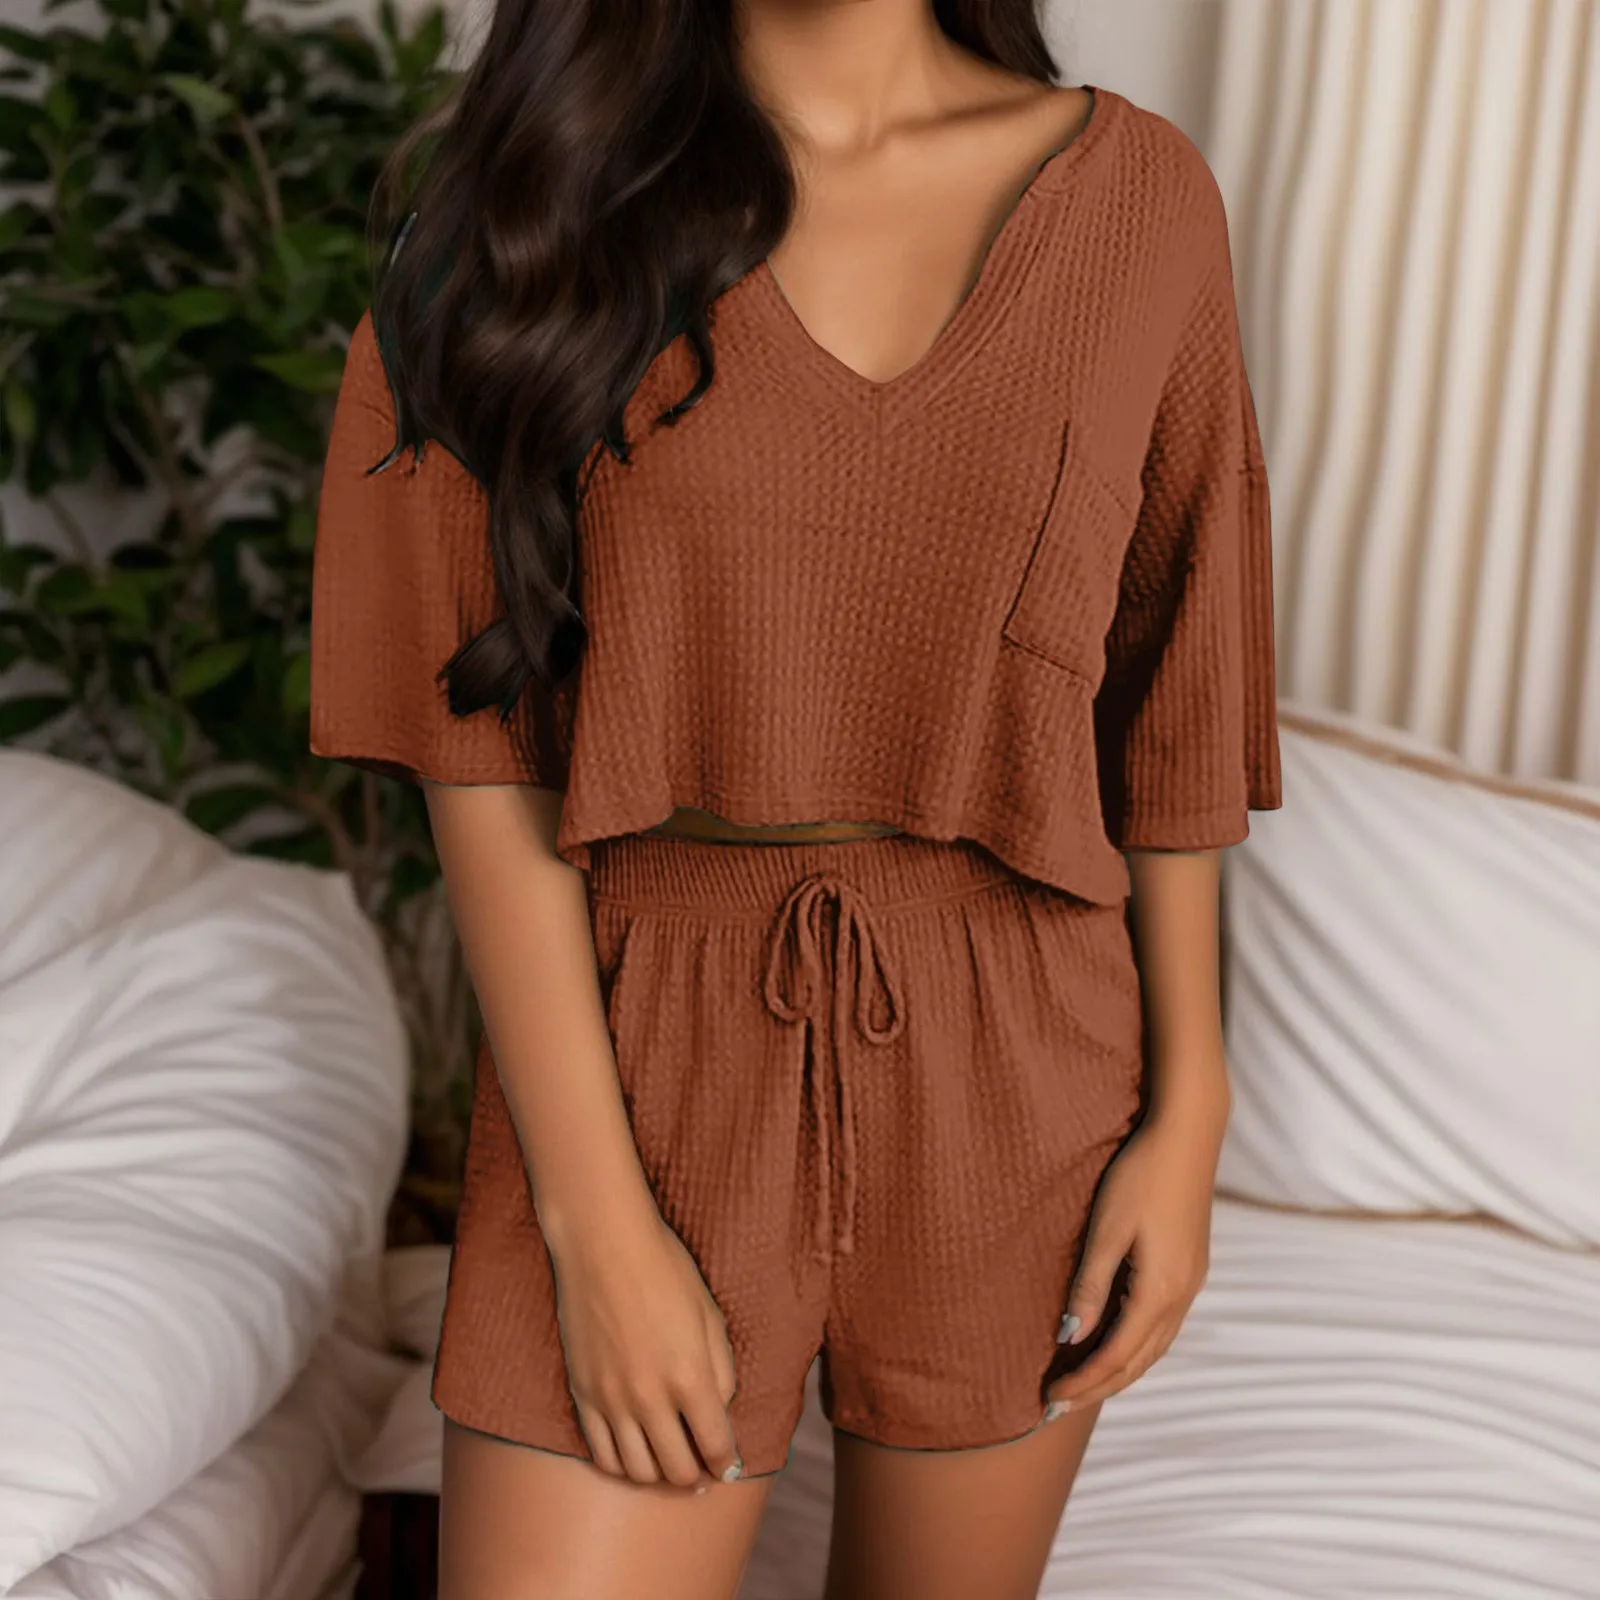 Women Short Sleeves Sets Fashion Knit V Neck Loose Crop Top With High Waist Shorts 2 Pieces Set Leisure Comfy Plus Size Outfits 1